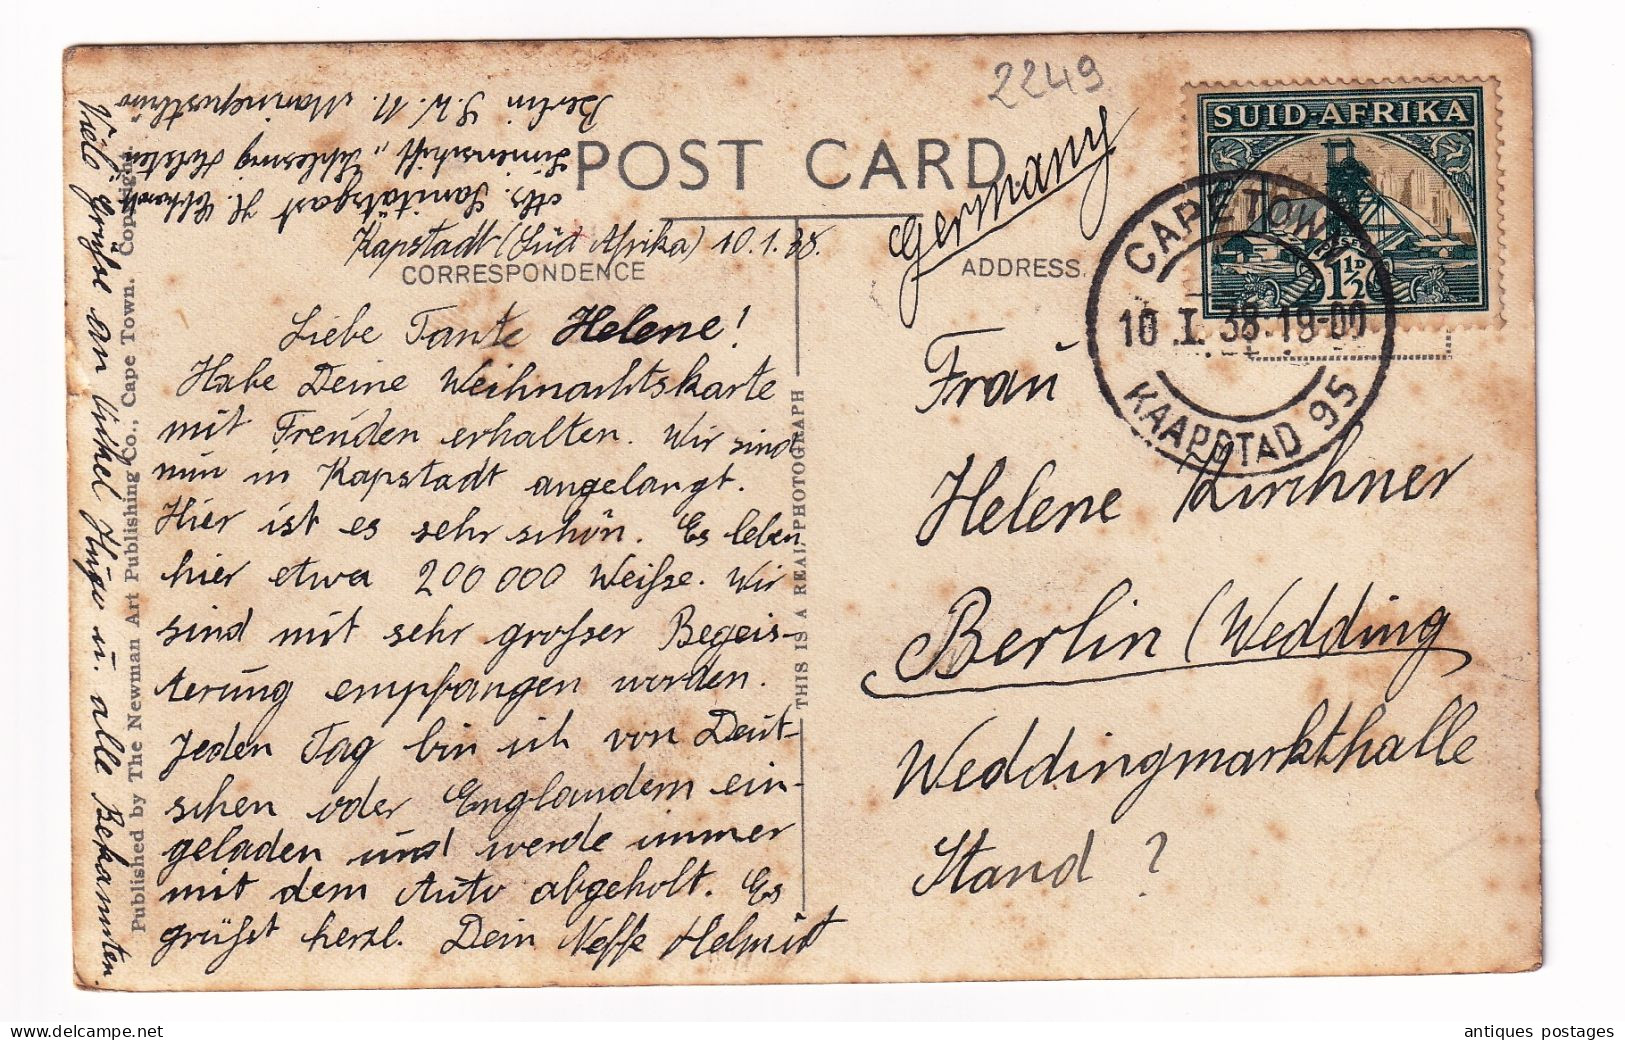 Post Card South Africa Captown 1938 Kaapstadt Südafrika Deutschland Berlin Germany Photo Eventide Over The Cape - Lettres & Documents